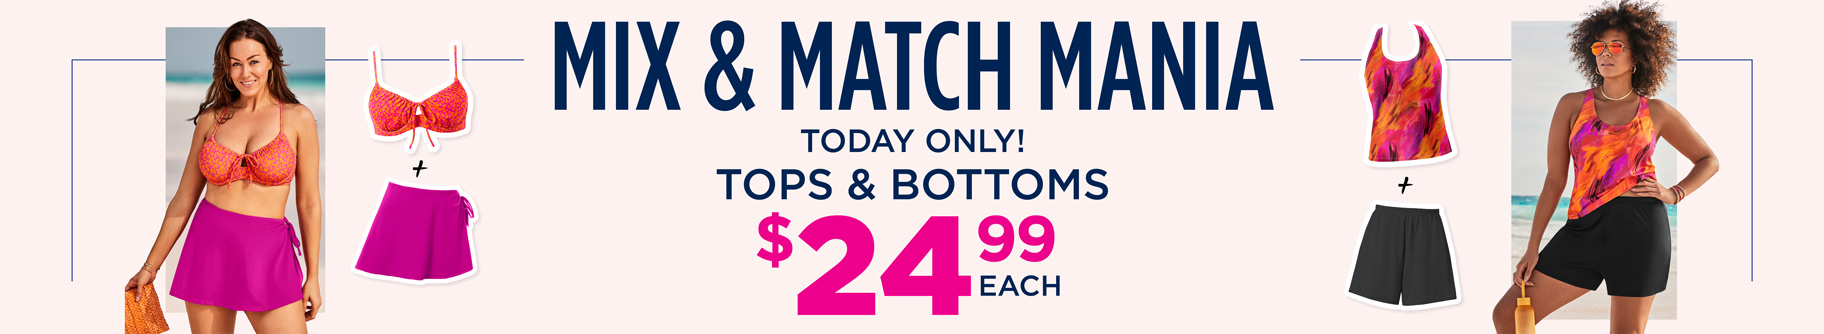 MIX AND MATCH TOPS AND BOTTOMS $24.99 EACH